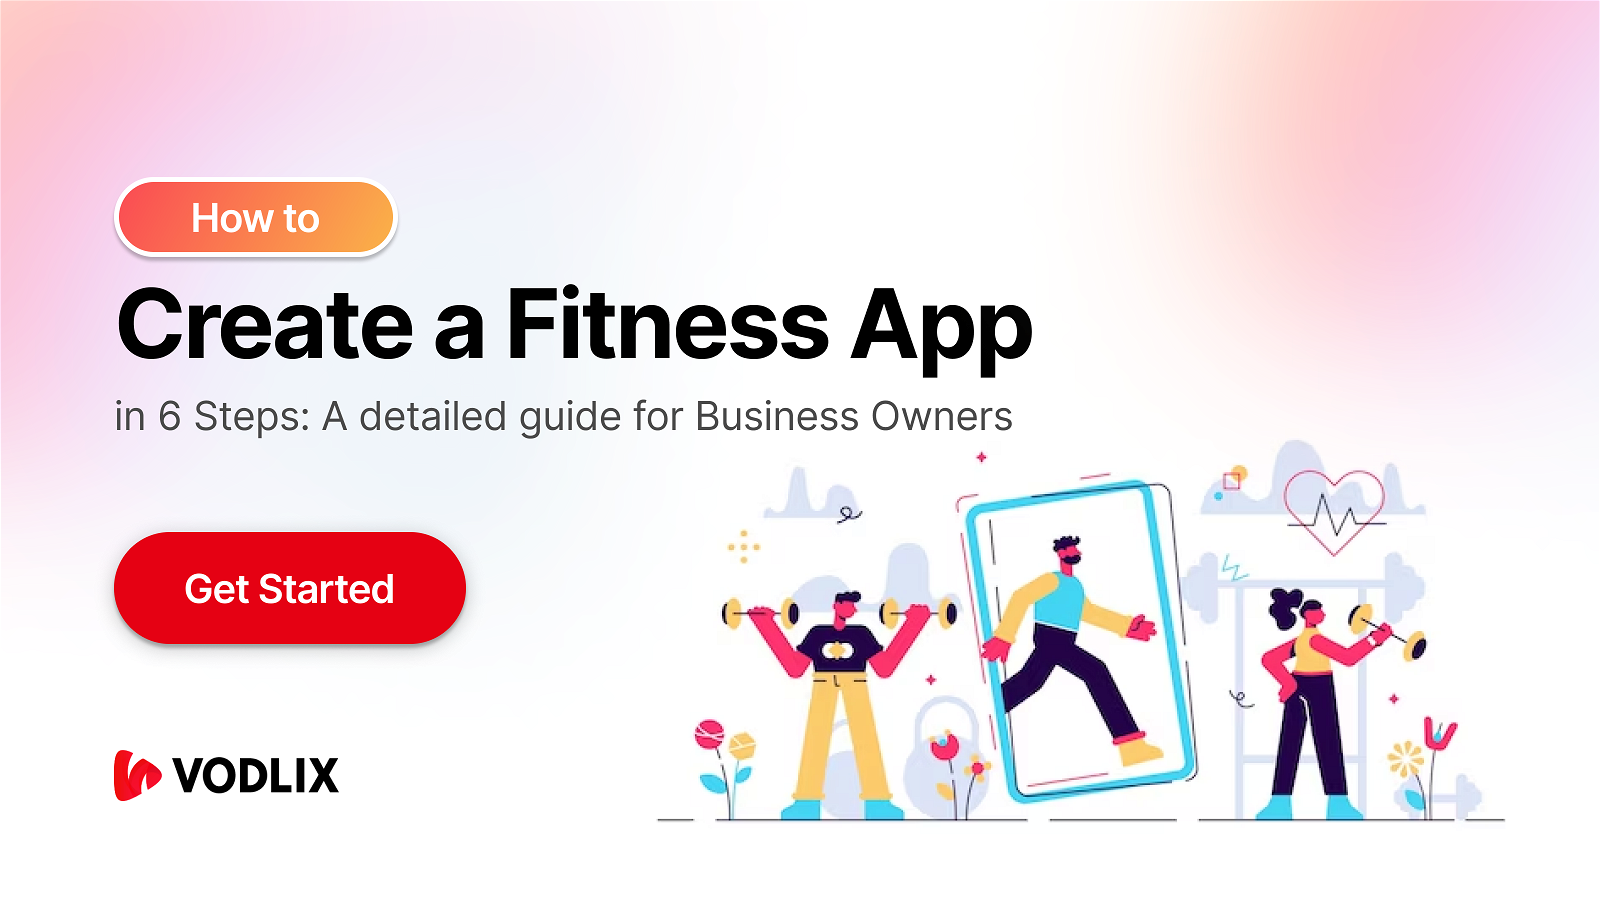 How to Create a Fitness App in 6 Steps: A detailed guide for Business Owners